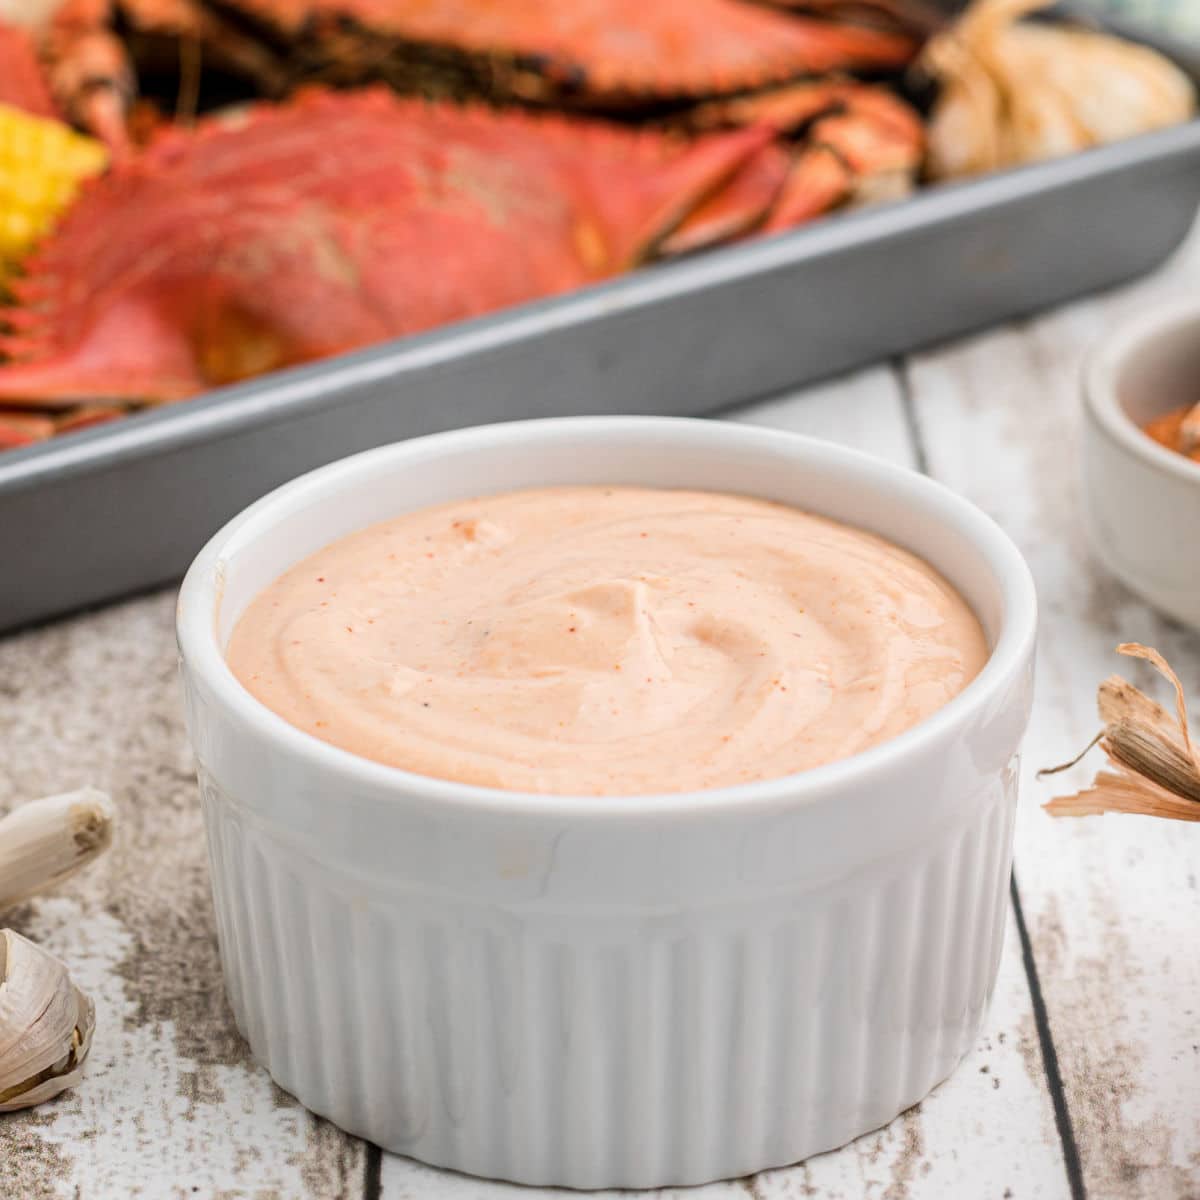 The Perfect Tide Seafood Dipping Sauce